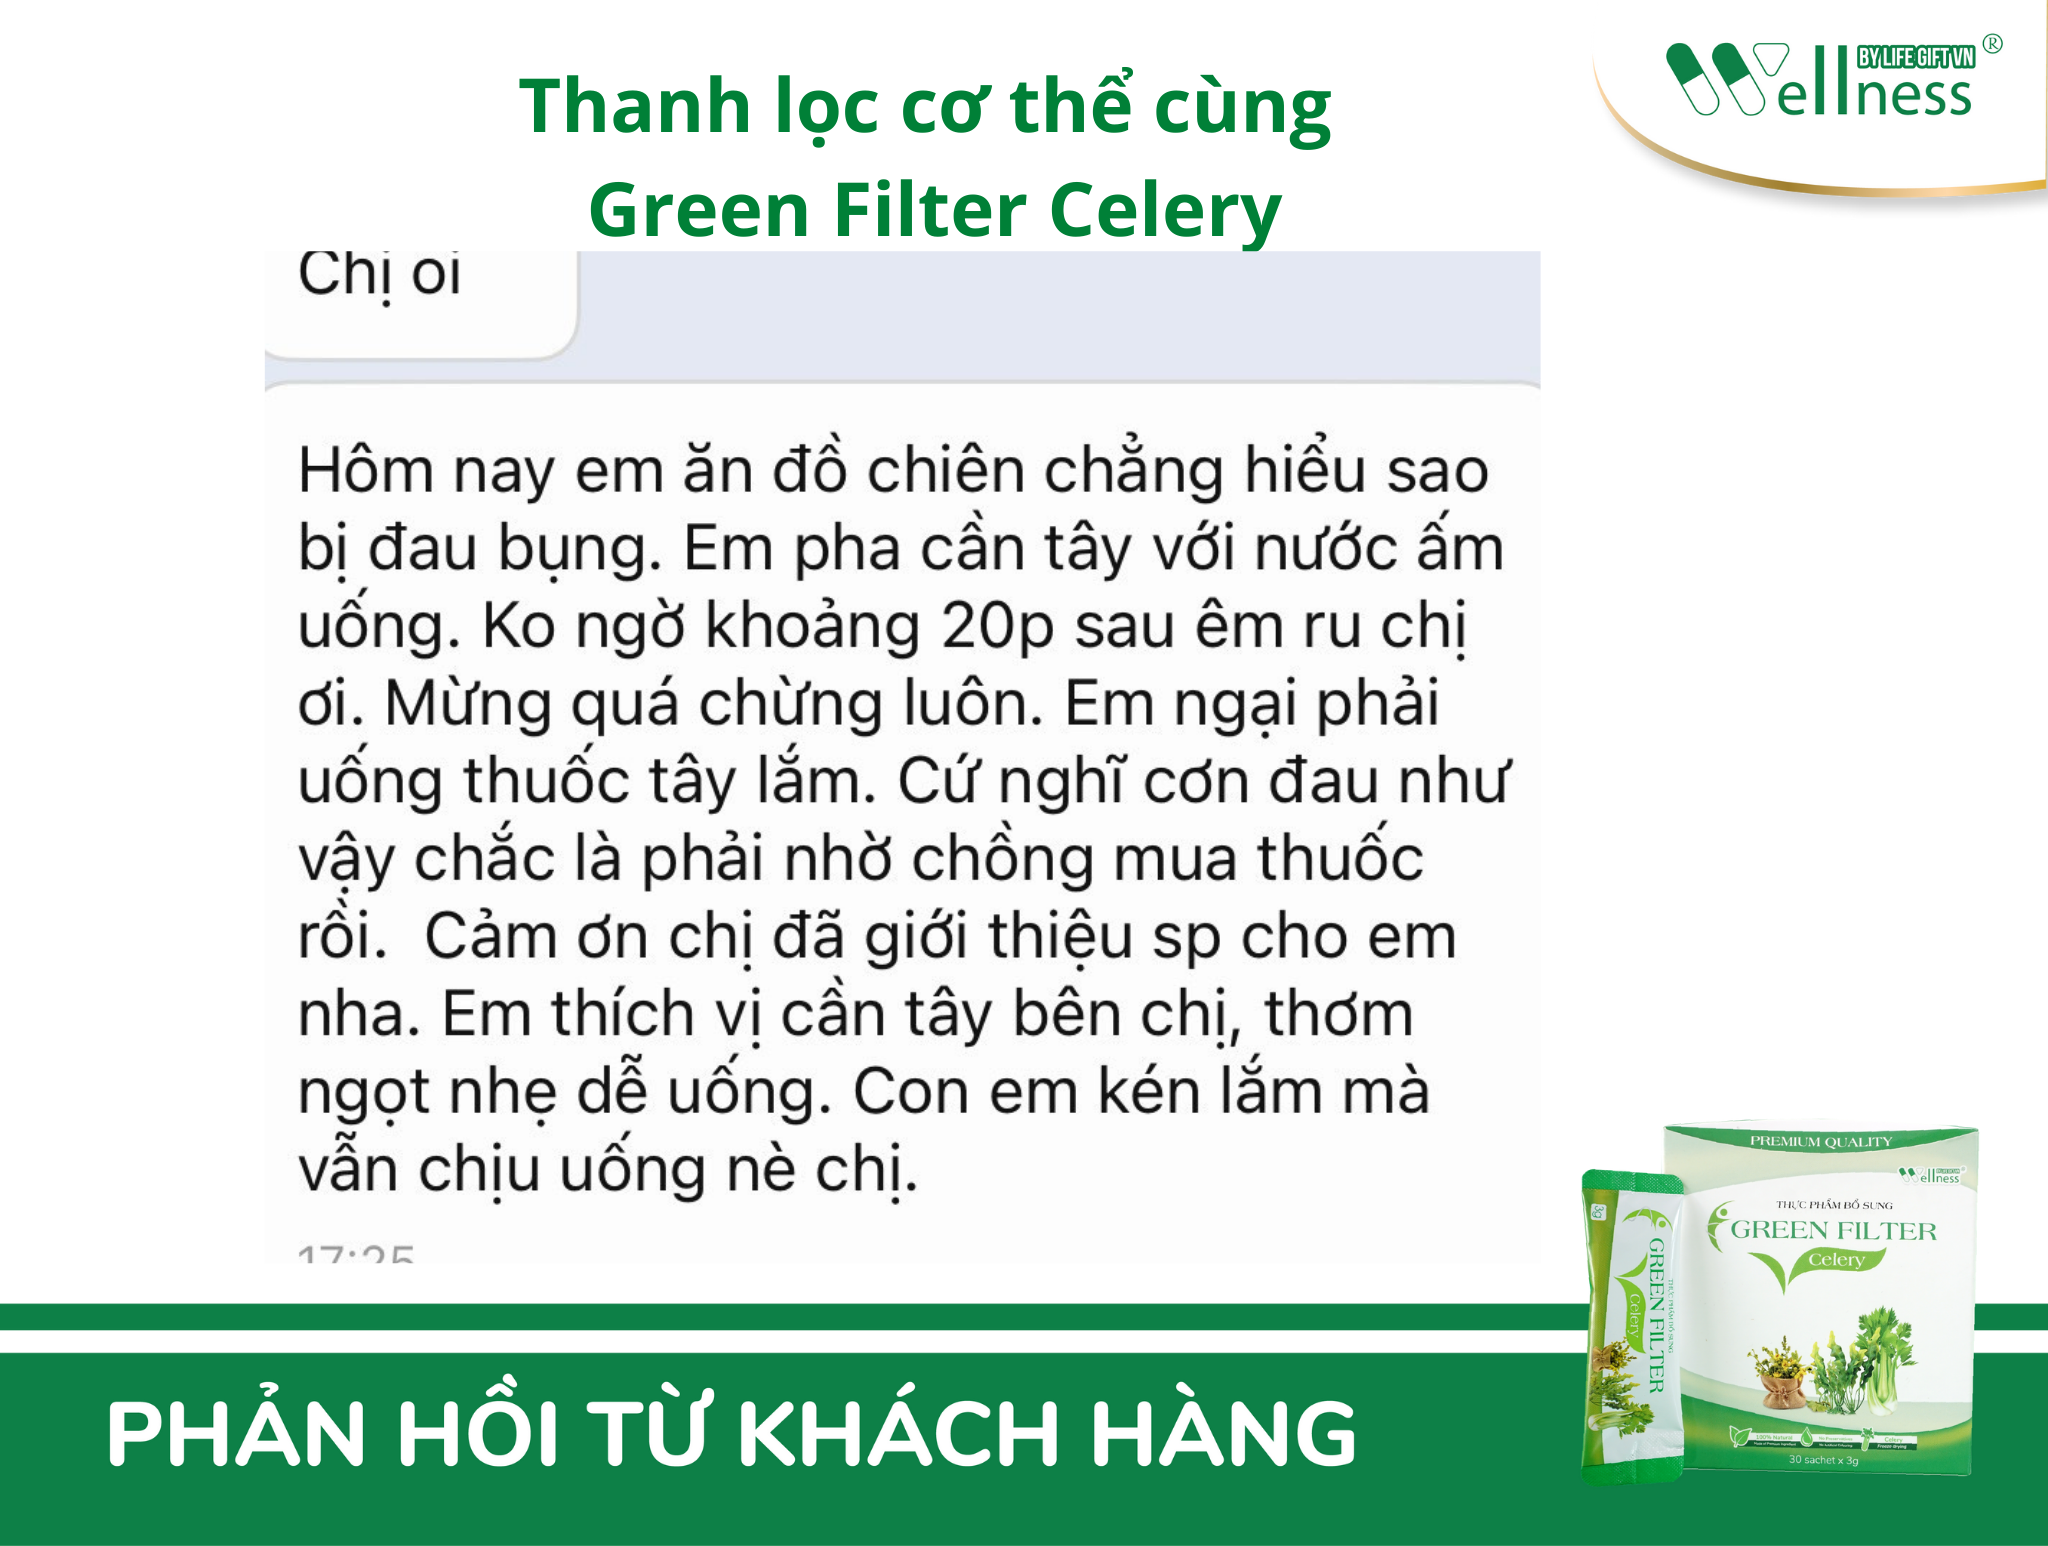 Thanh lọc cơ thể cùng Green Filter Celery - Wellness by Life Gift VN